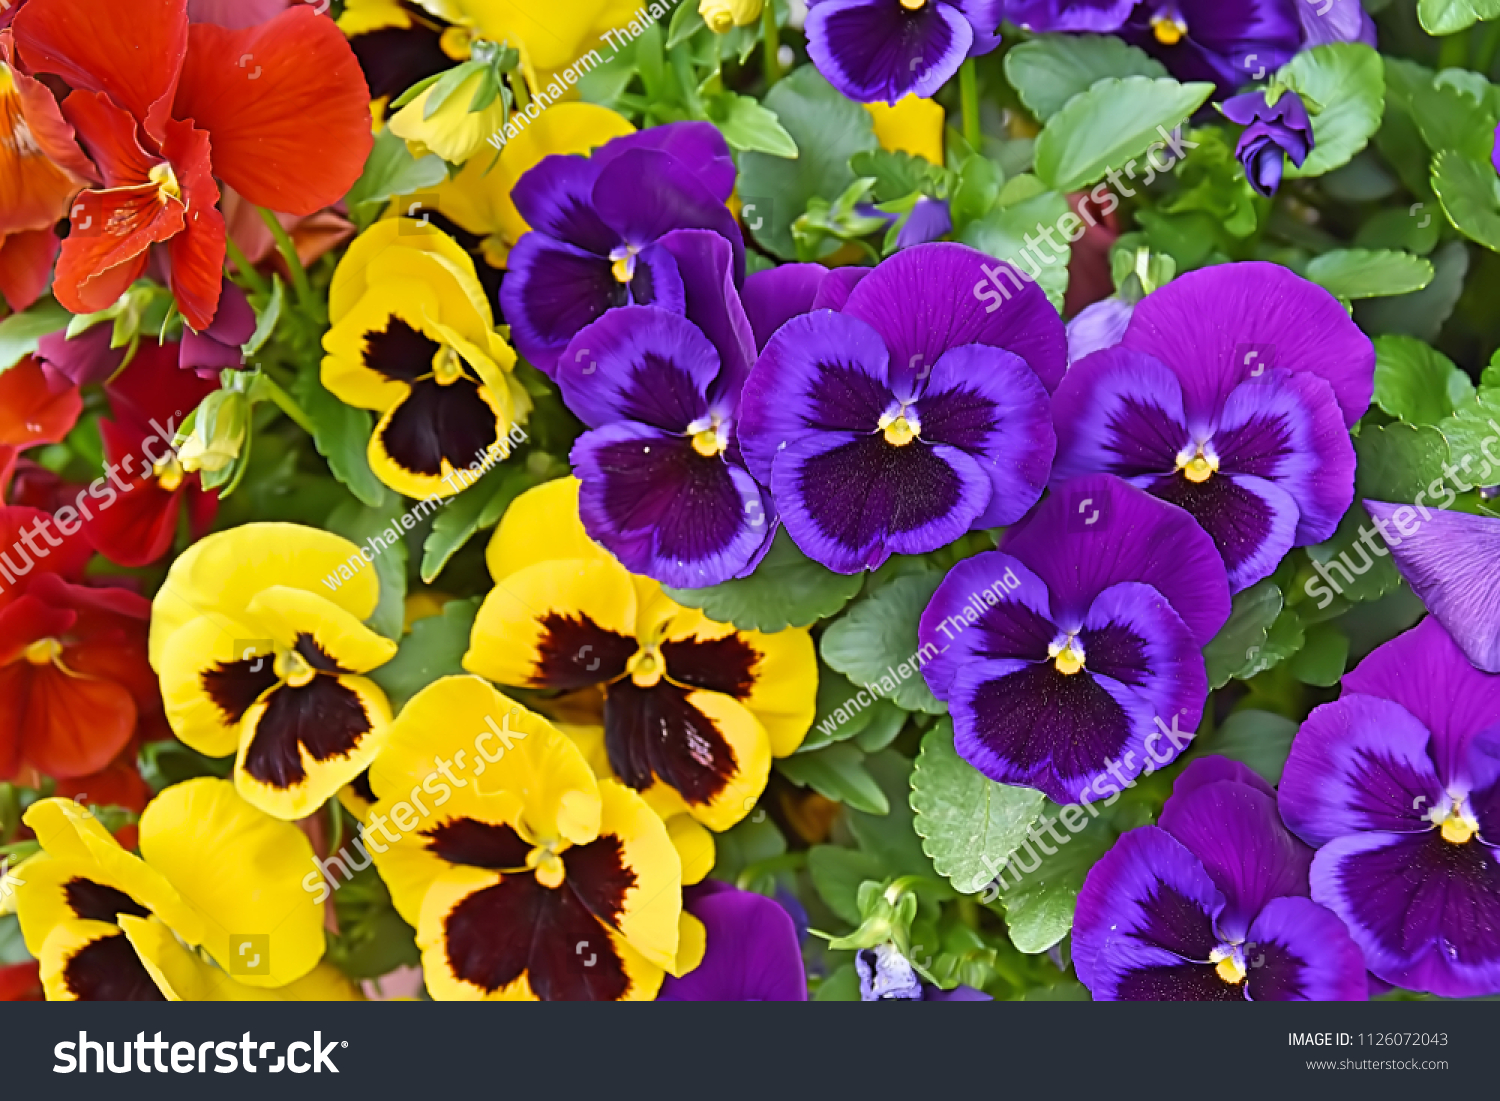 Closeup of colorful pansy flower, The garden pansy is a type of large-flowered hybrid plant cultivated as a garden flower. This image was blurred or selective focus. #1126072043